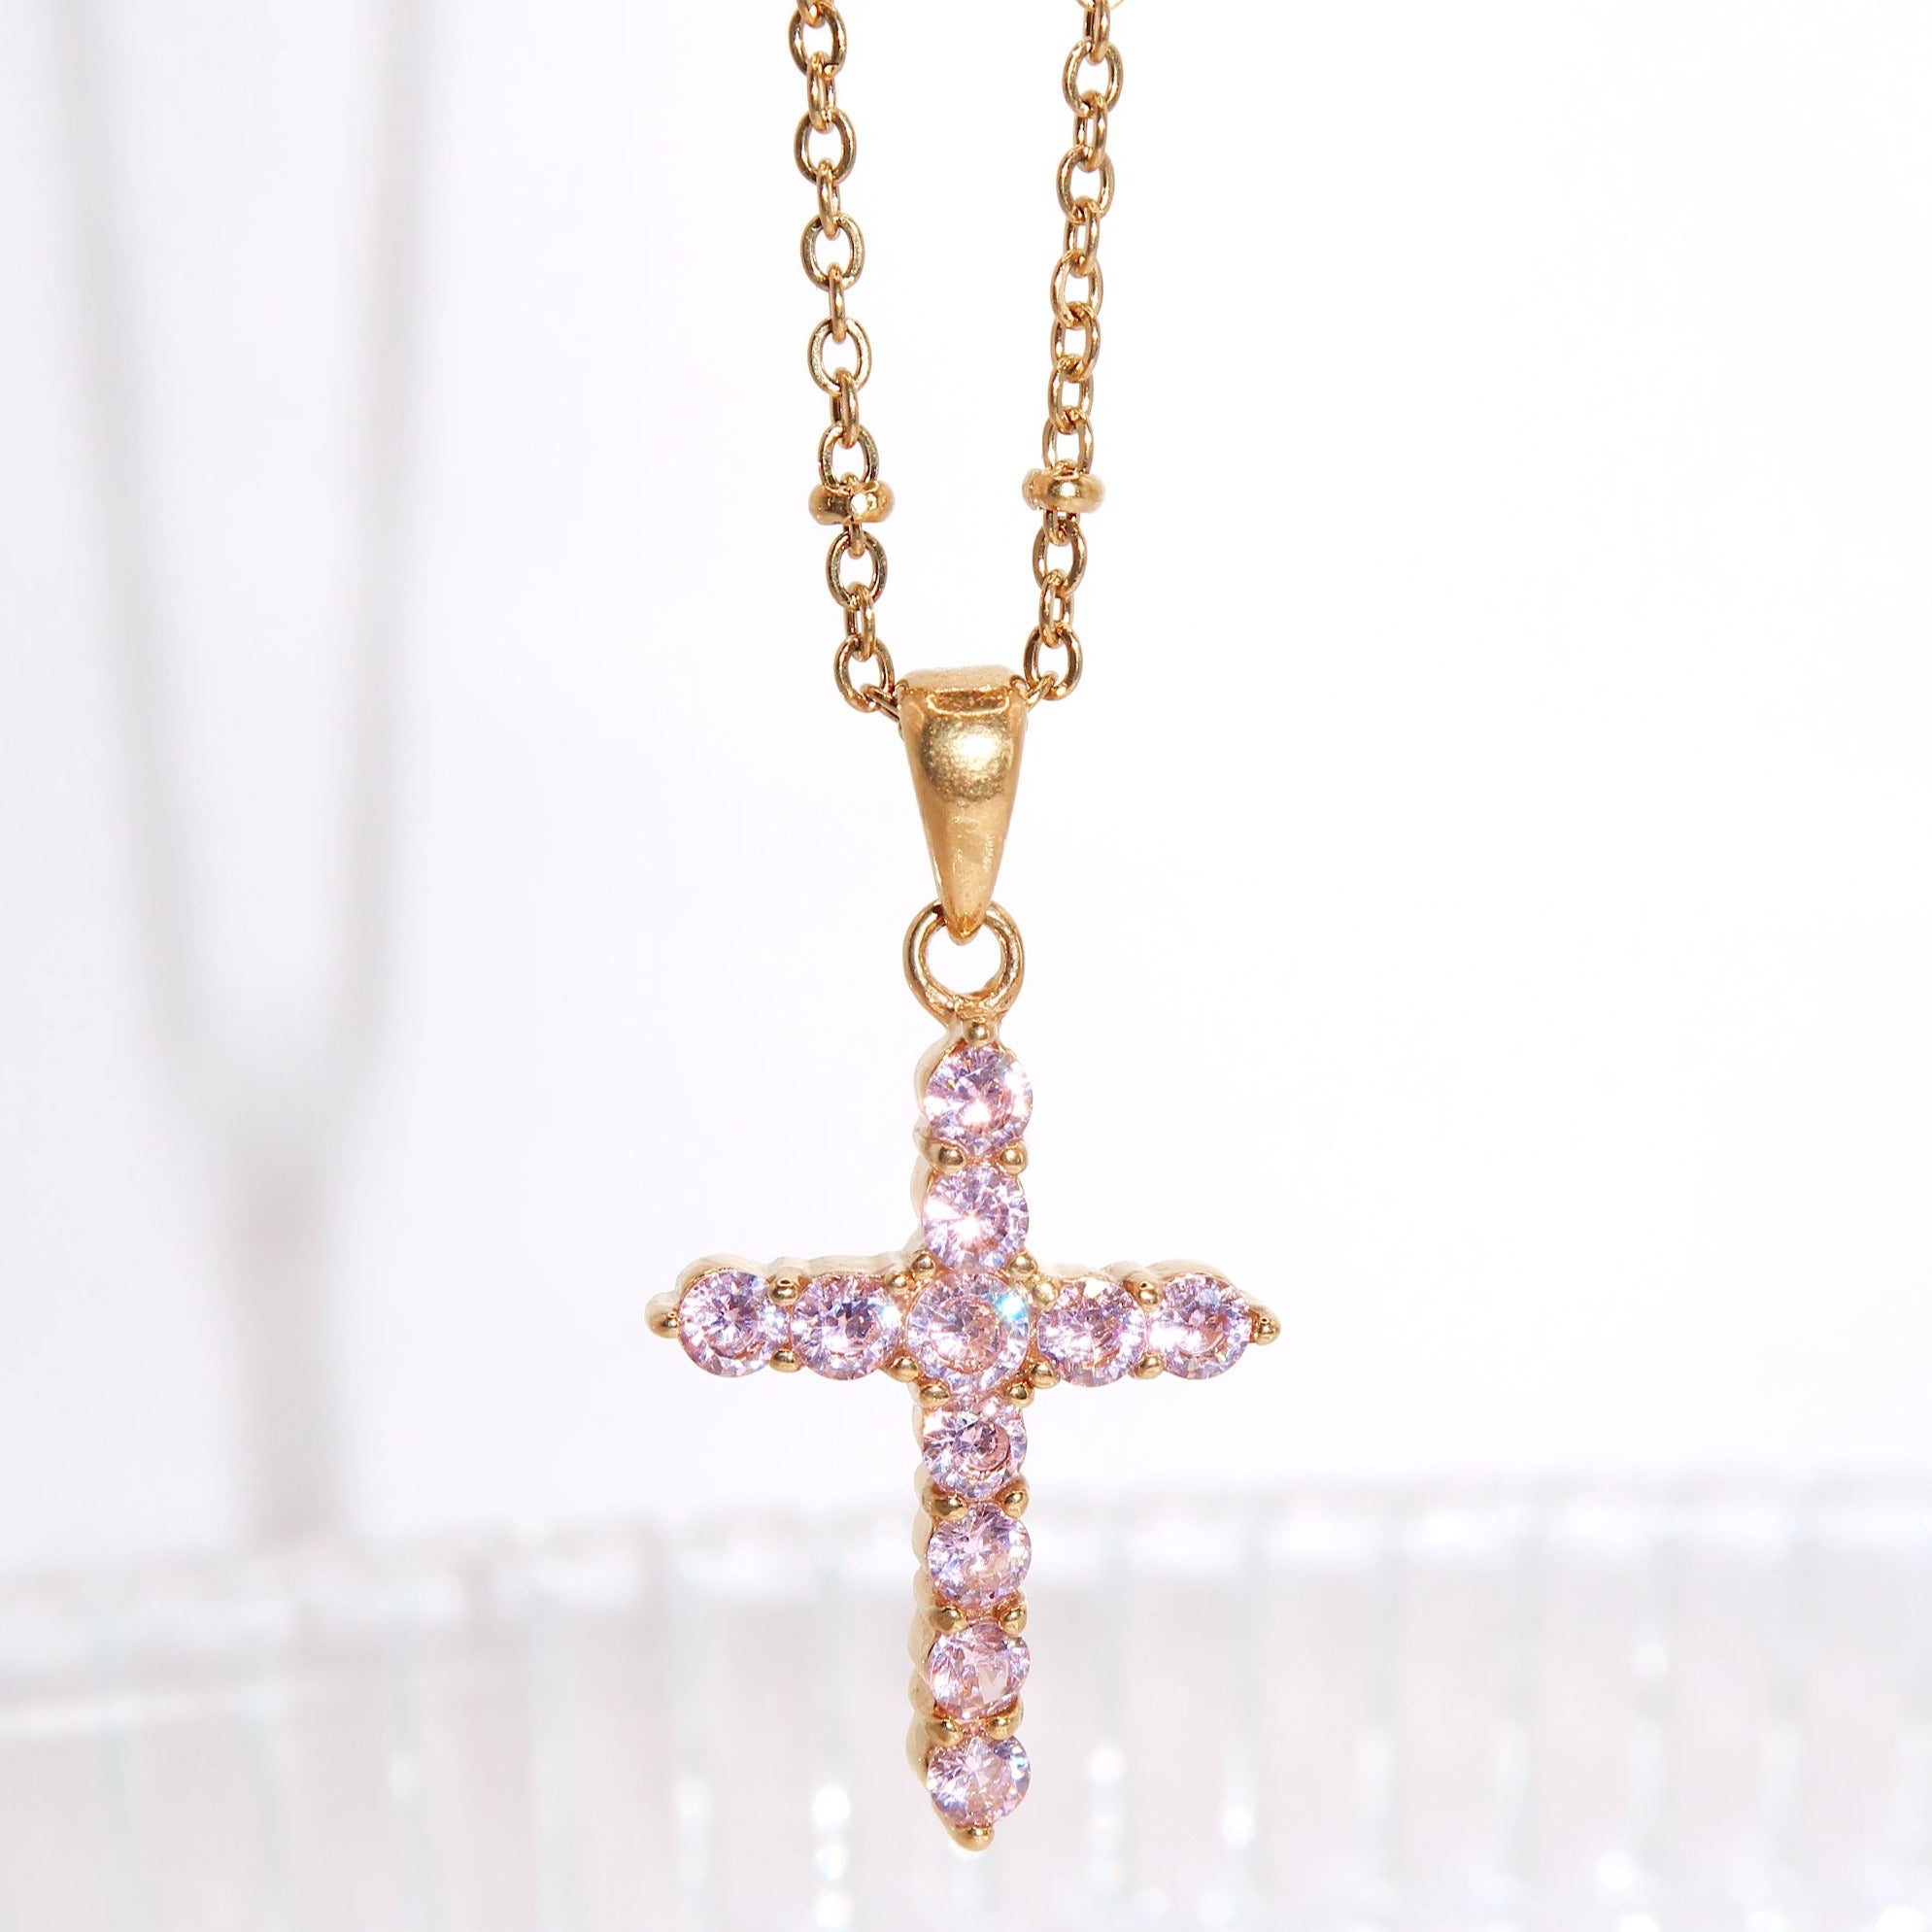 EMMY - 18K PVD Gold Plated Dainty Cross Pendant Necklace with Pink CZ Stones